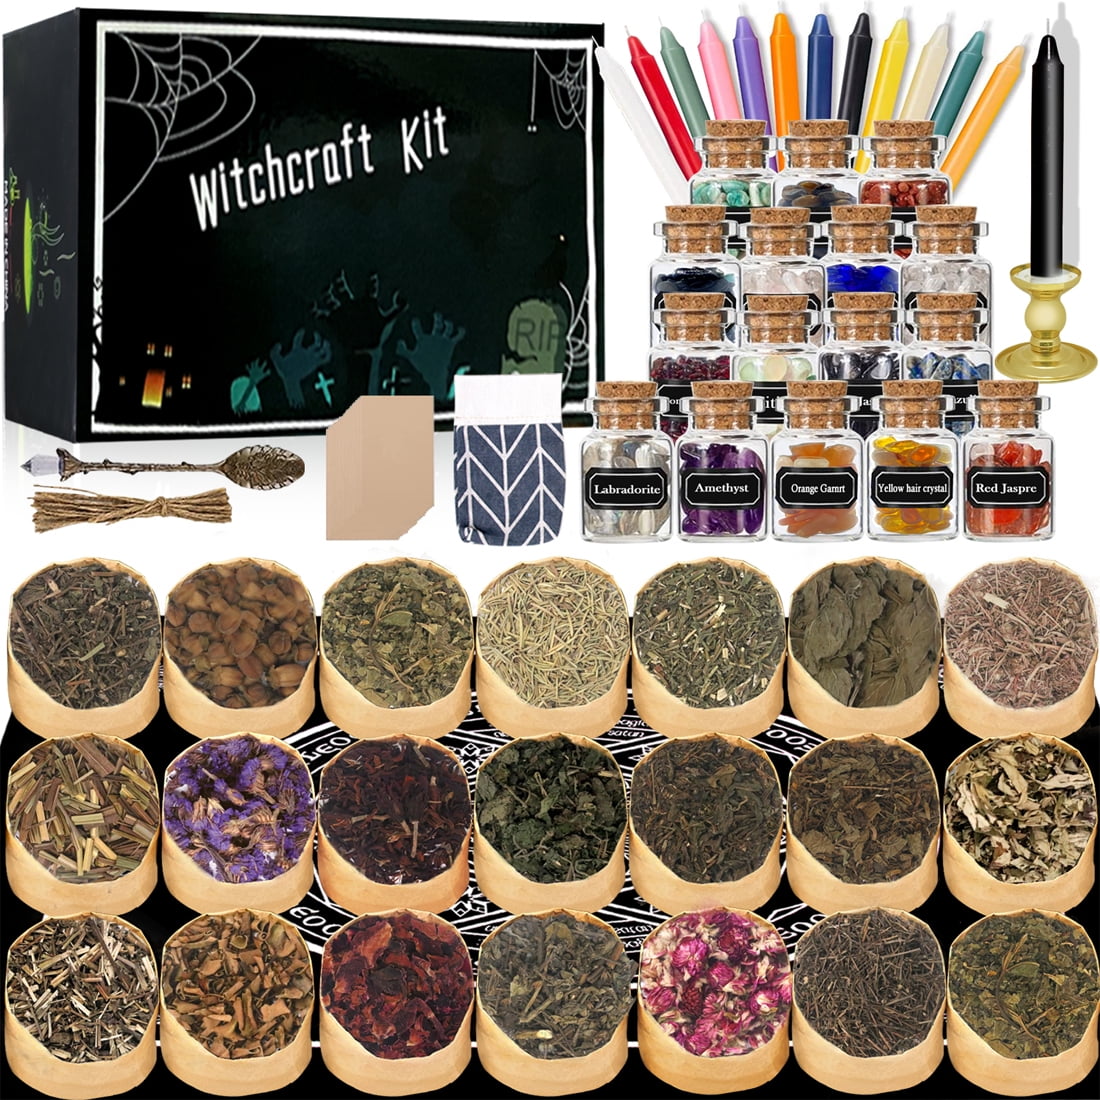  36Pcs Dried Herbs for Witchcraft, Witchcraft Supplies for Witch  Spells, Pagan, Rituals, Wiccan Supplies and Tools Gifts for Beginner  Experienced : Home & Kitchen